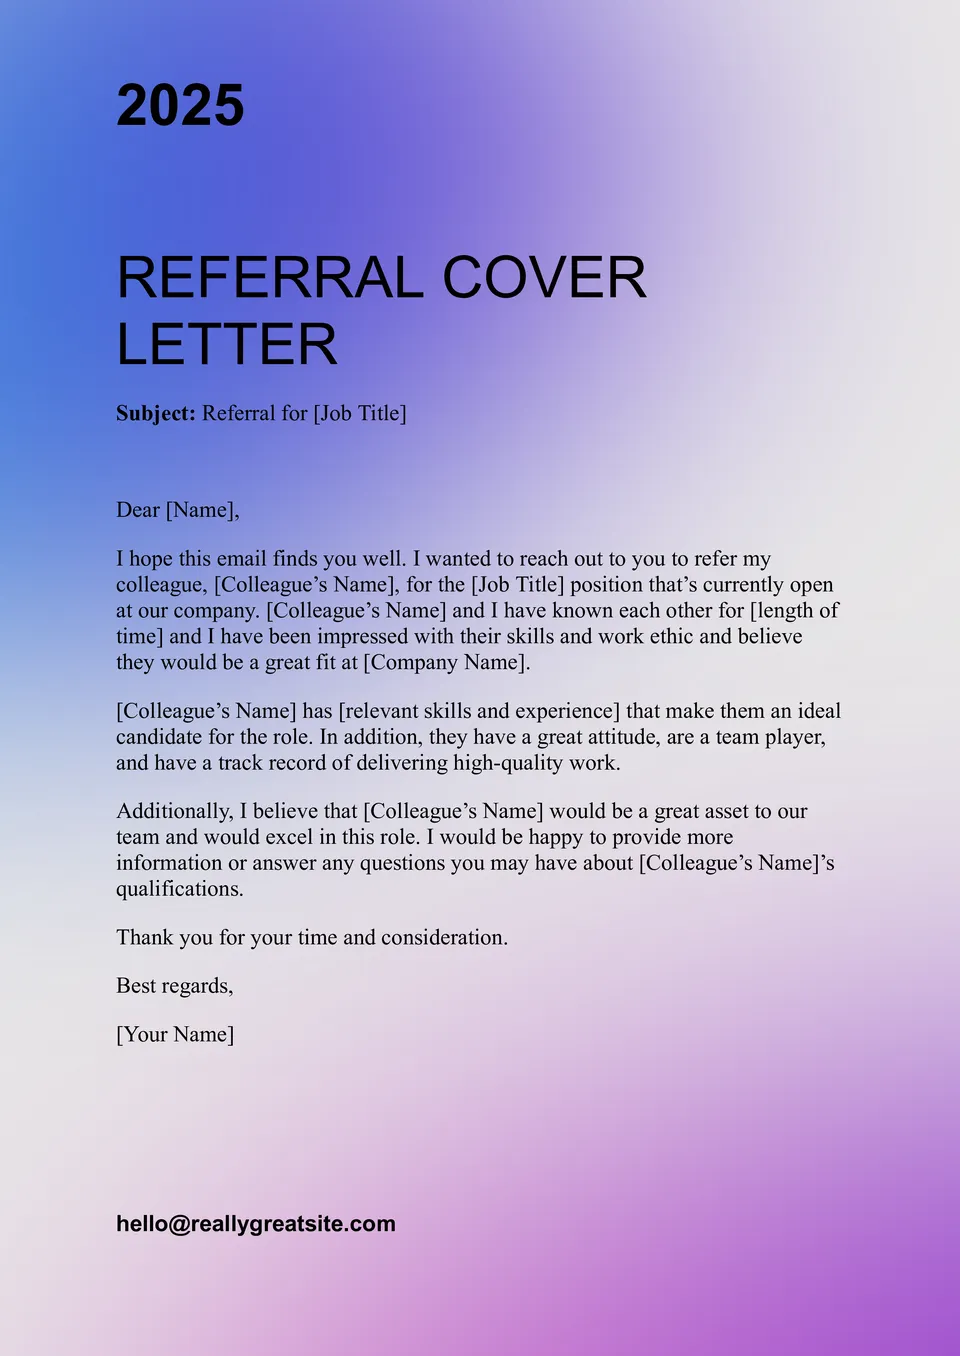 Referral Cover Letter Template